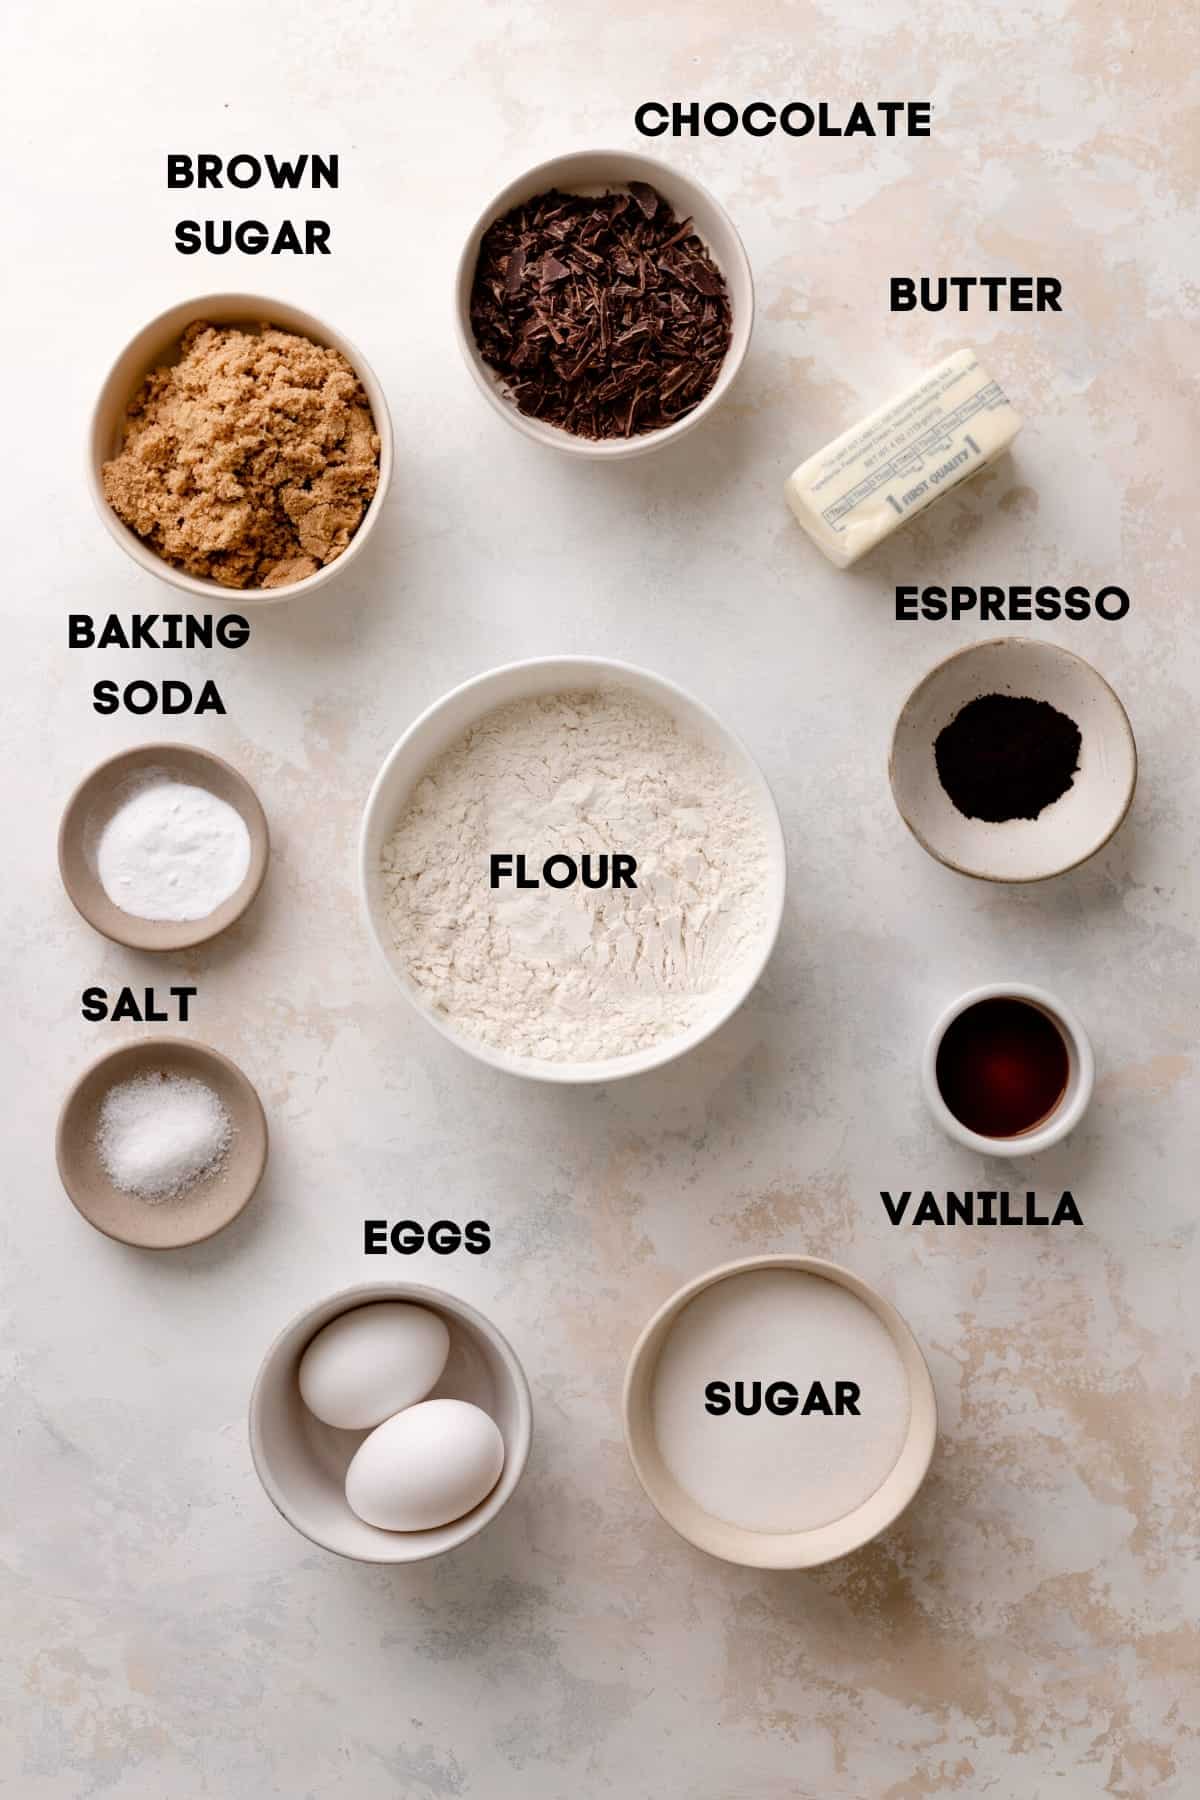 ingredients needed to make espresso chocolate chip cookies.